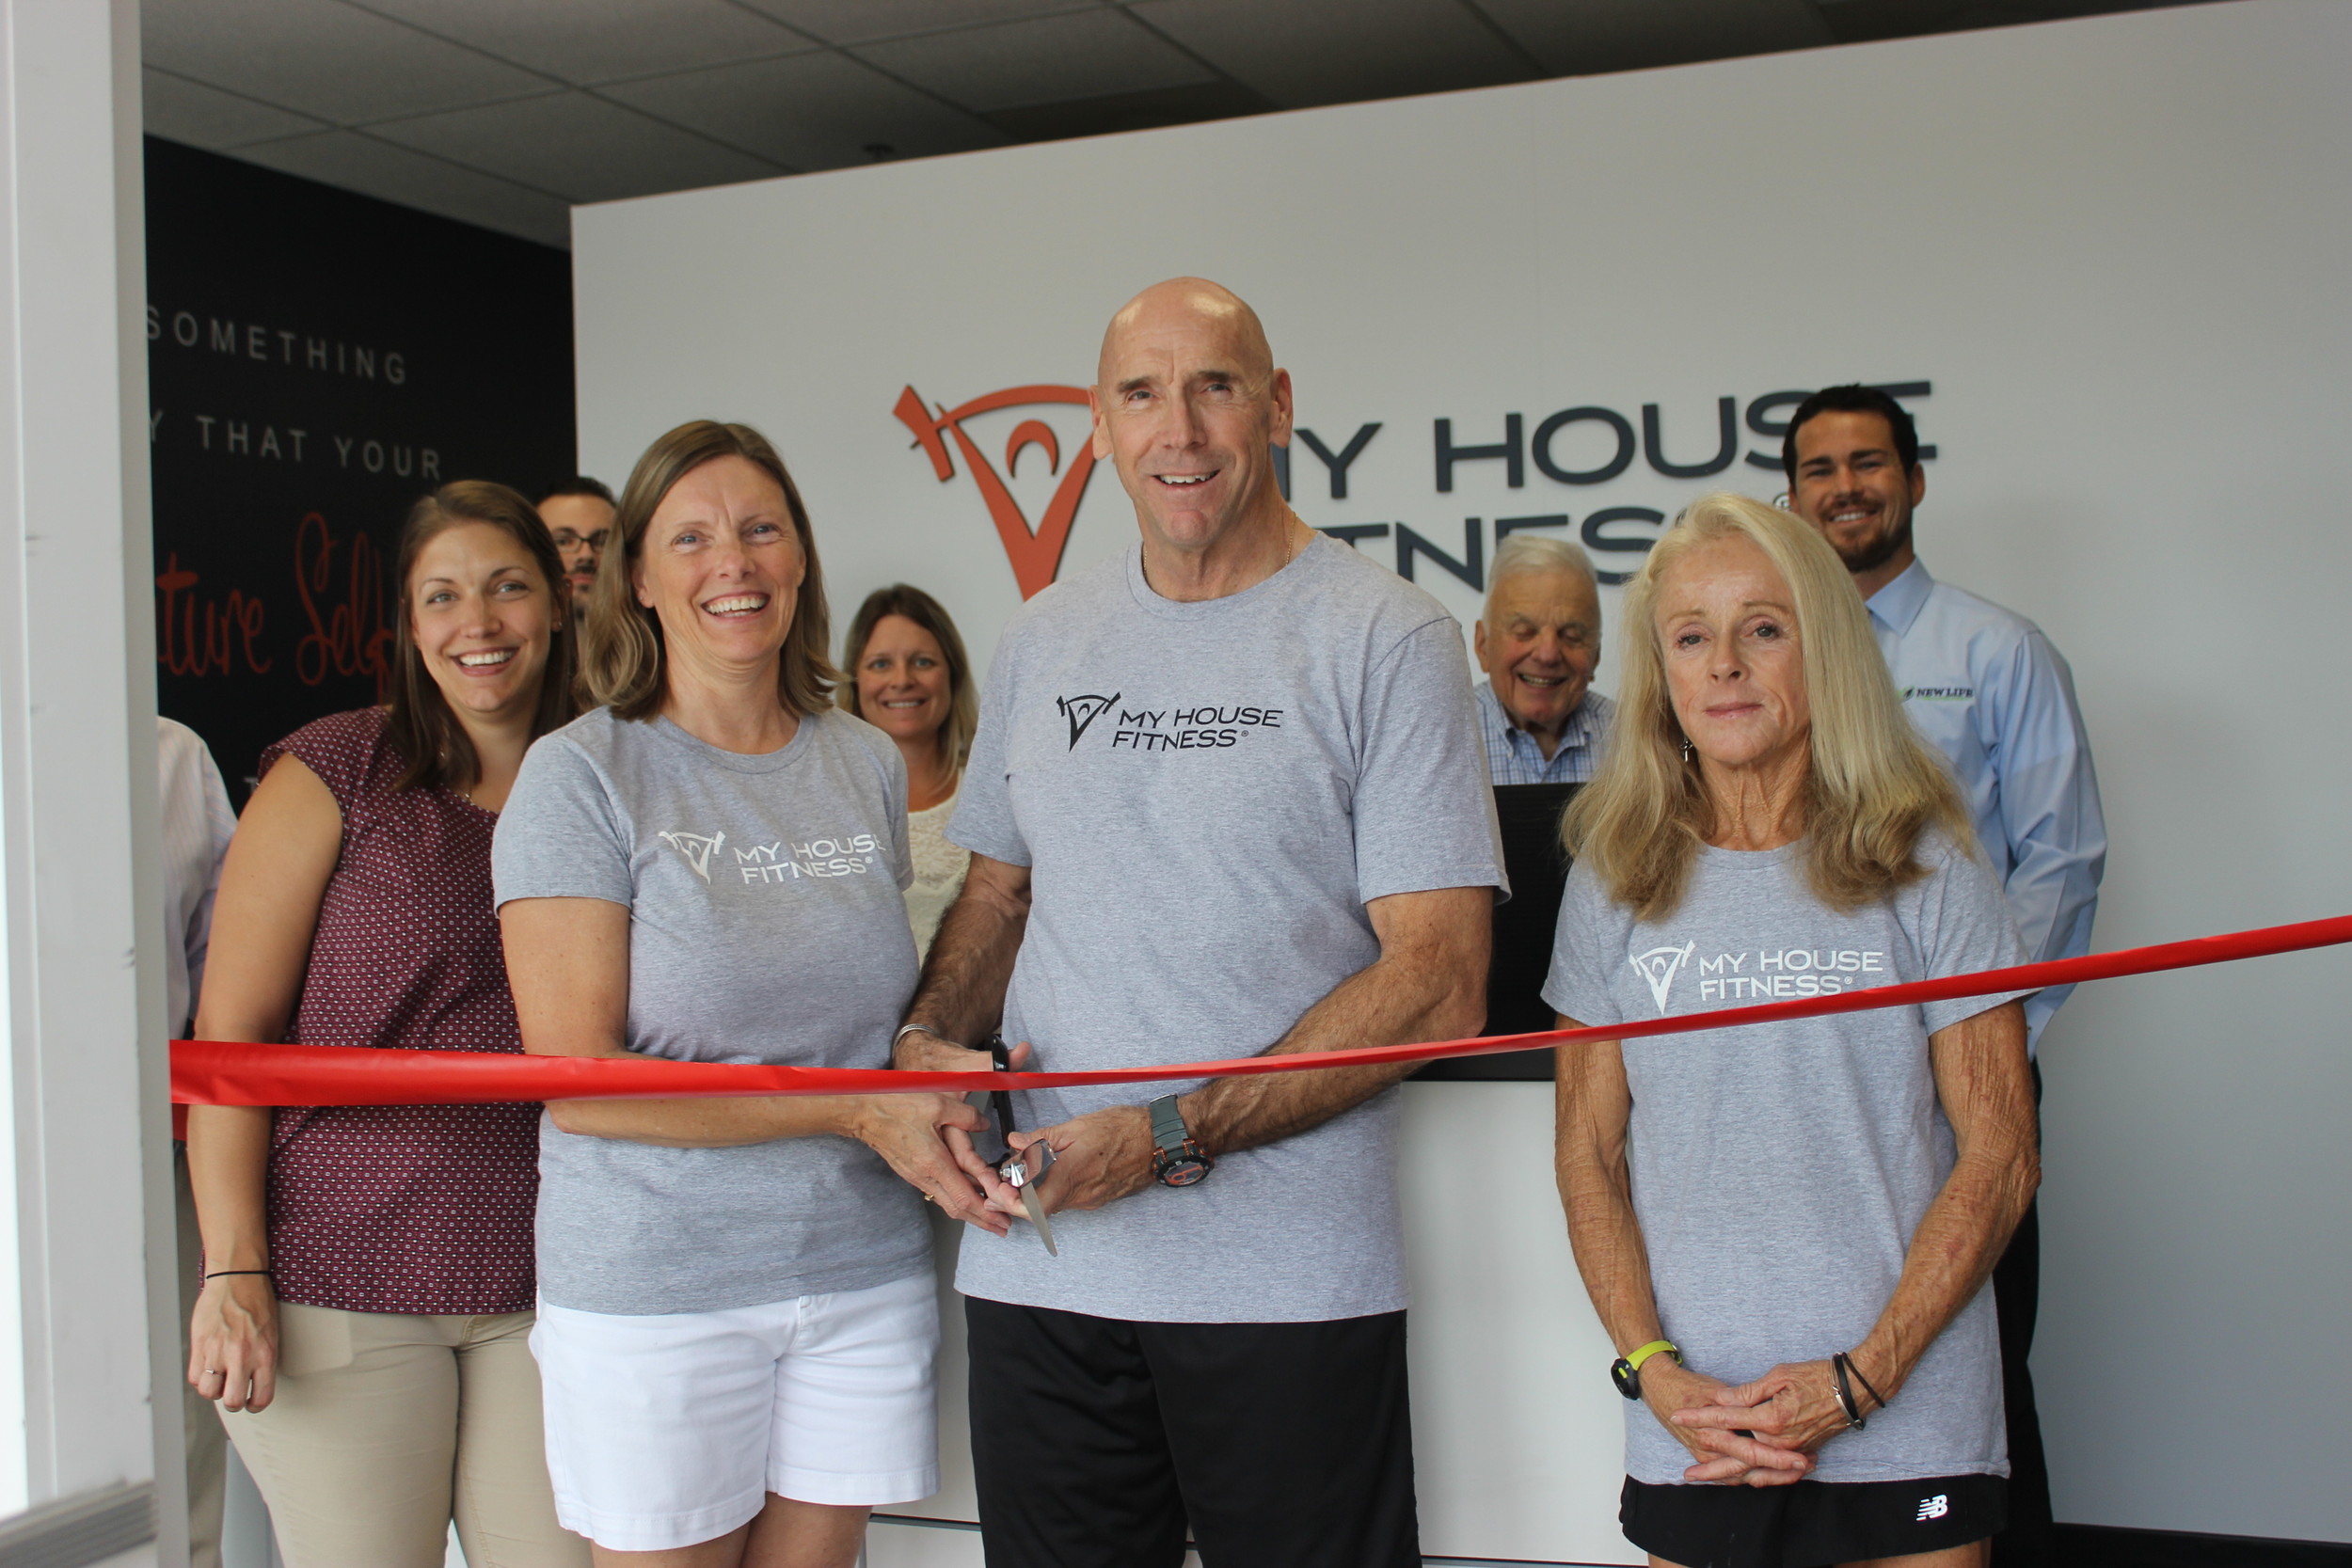 The My House Fitness team participates in a ribbon cutting ceremony as part of its grand opening event.